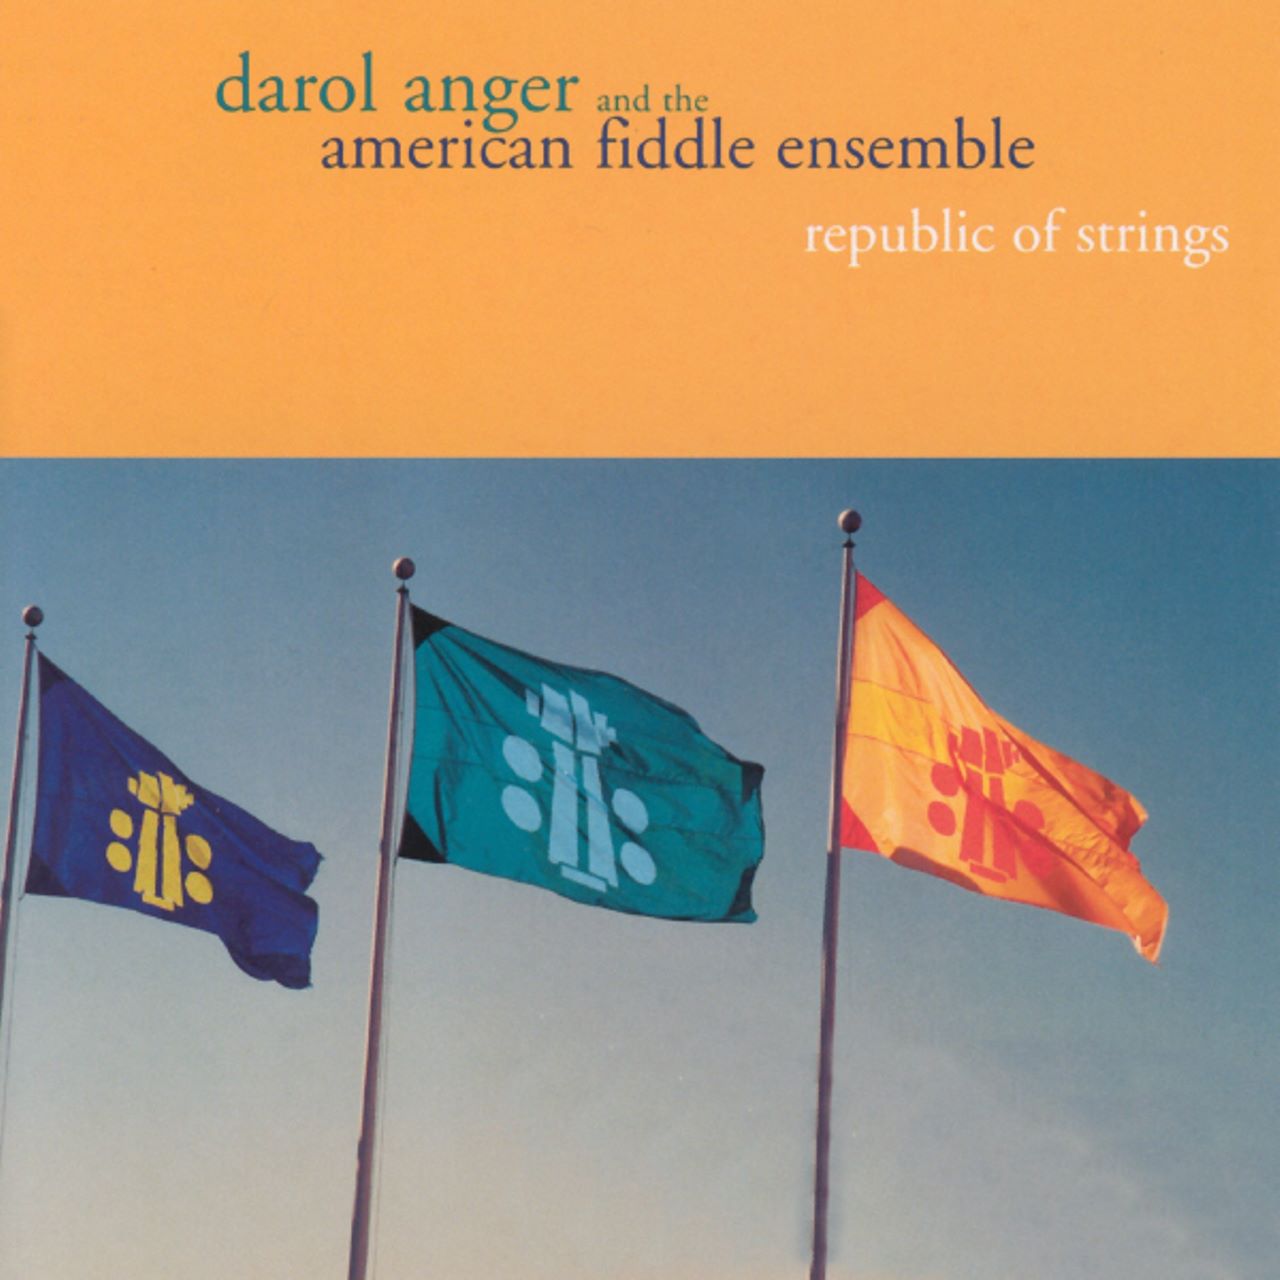 Darol Anger And The American Fiddle Ensemble - Repubblic Of Strings cover album